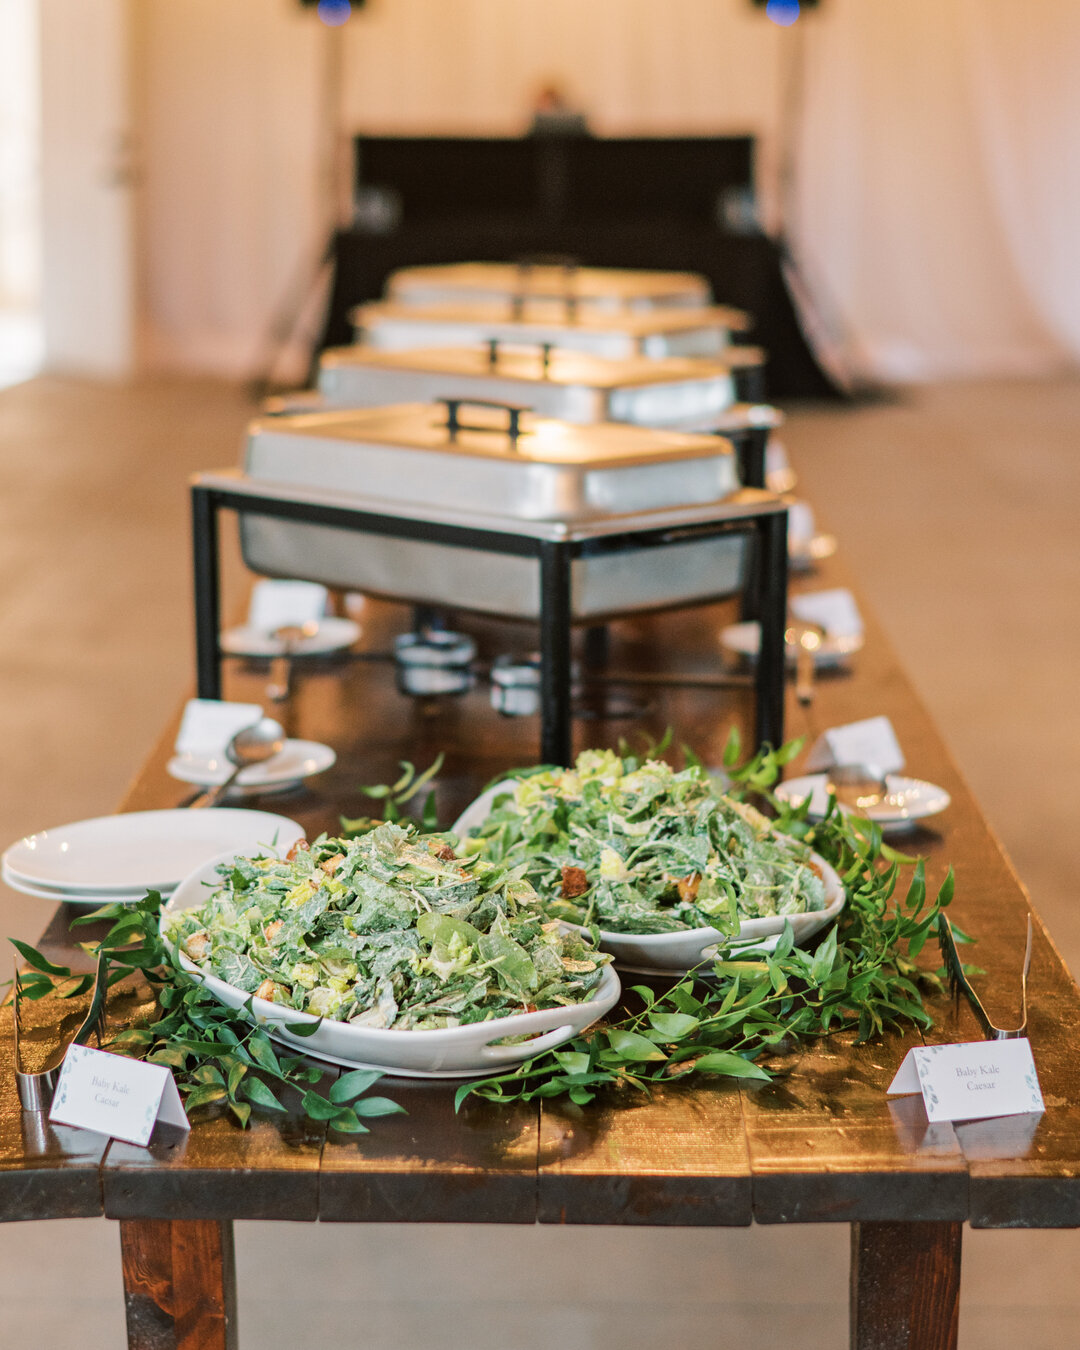 Keep the food options hot with buffet style service! @Rootscatering will do a phenomenal job with your special event. Let our team of experts guide you to the right service options for your event! ⠀⠀⠀⠀⠀⠀⠀⠀⠀
⠀⠀⠀⠀⠀⠀⠀⠀⠀
Photographer: @maggiemillsphotogr